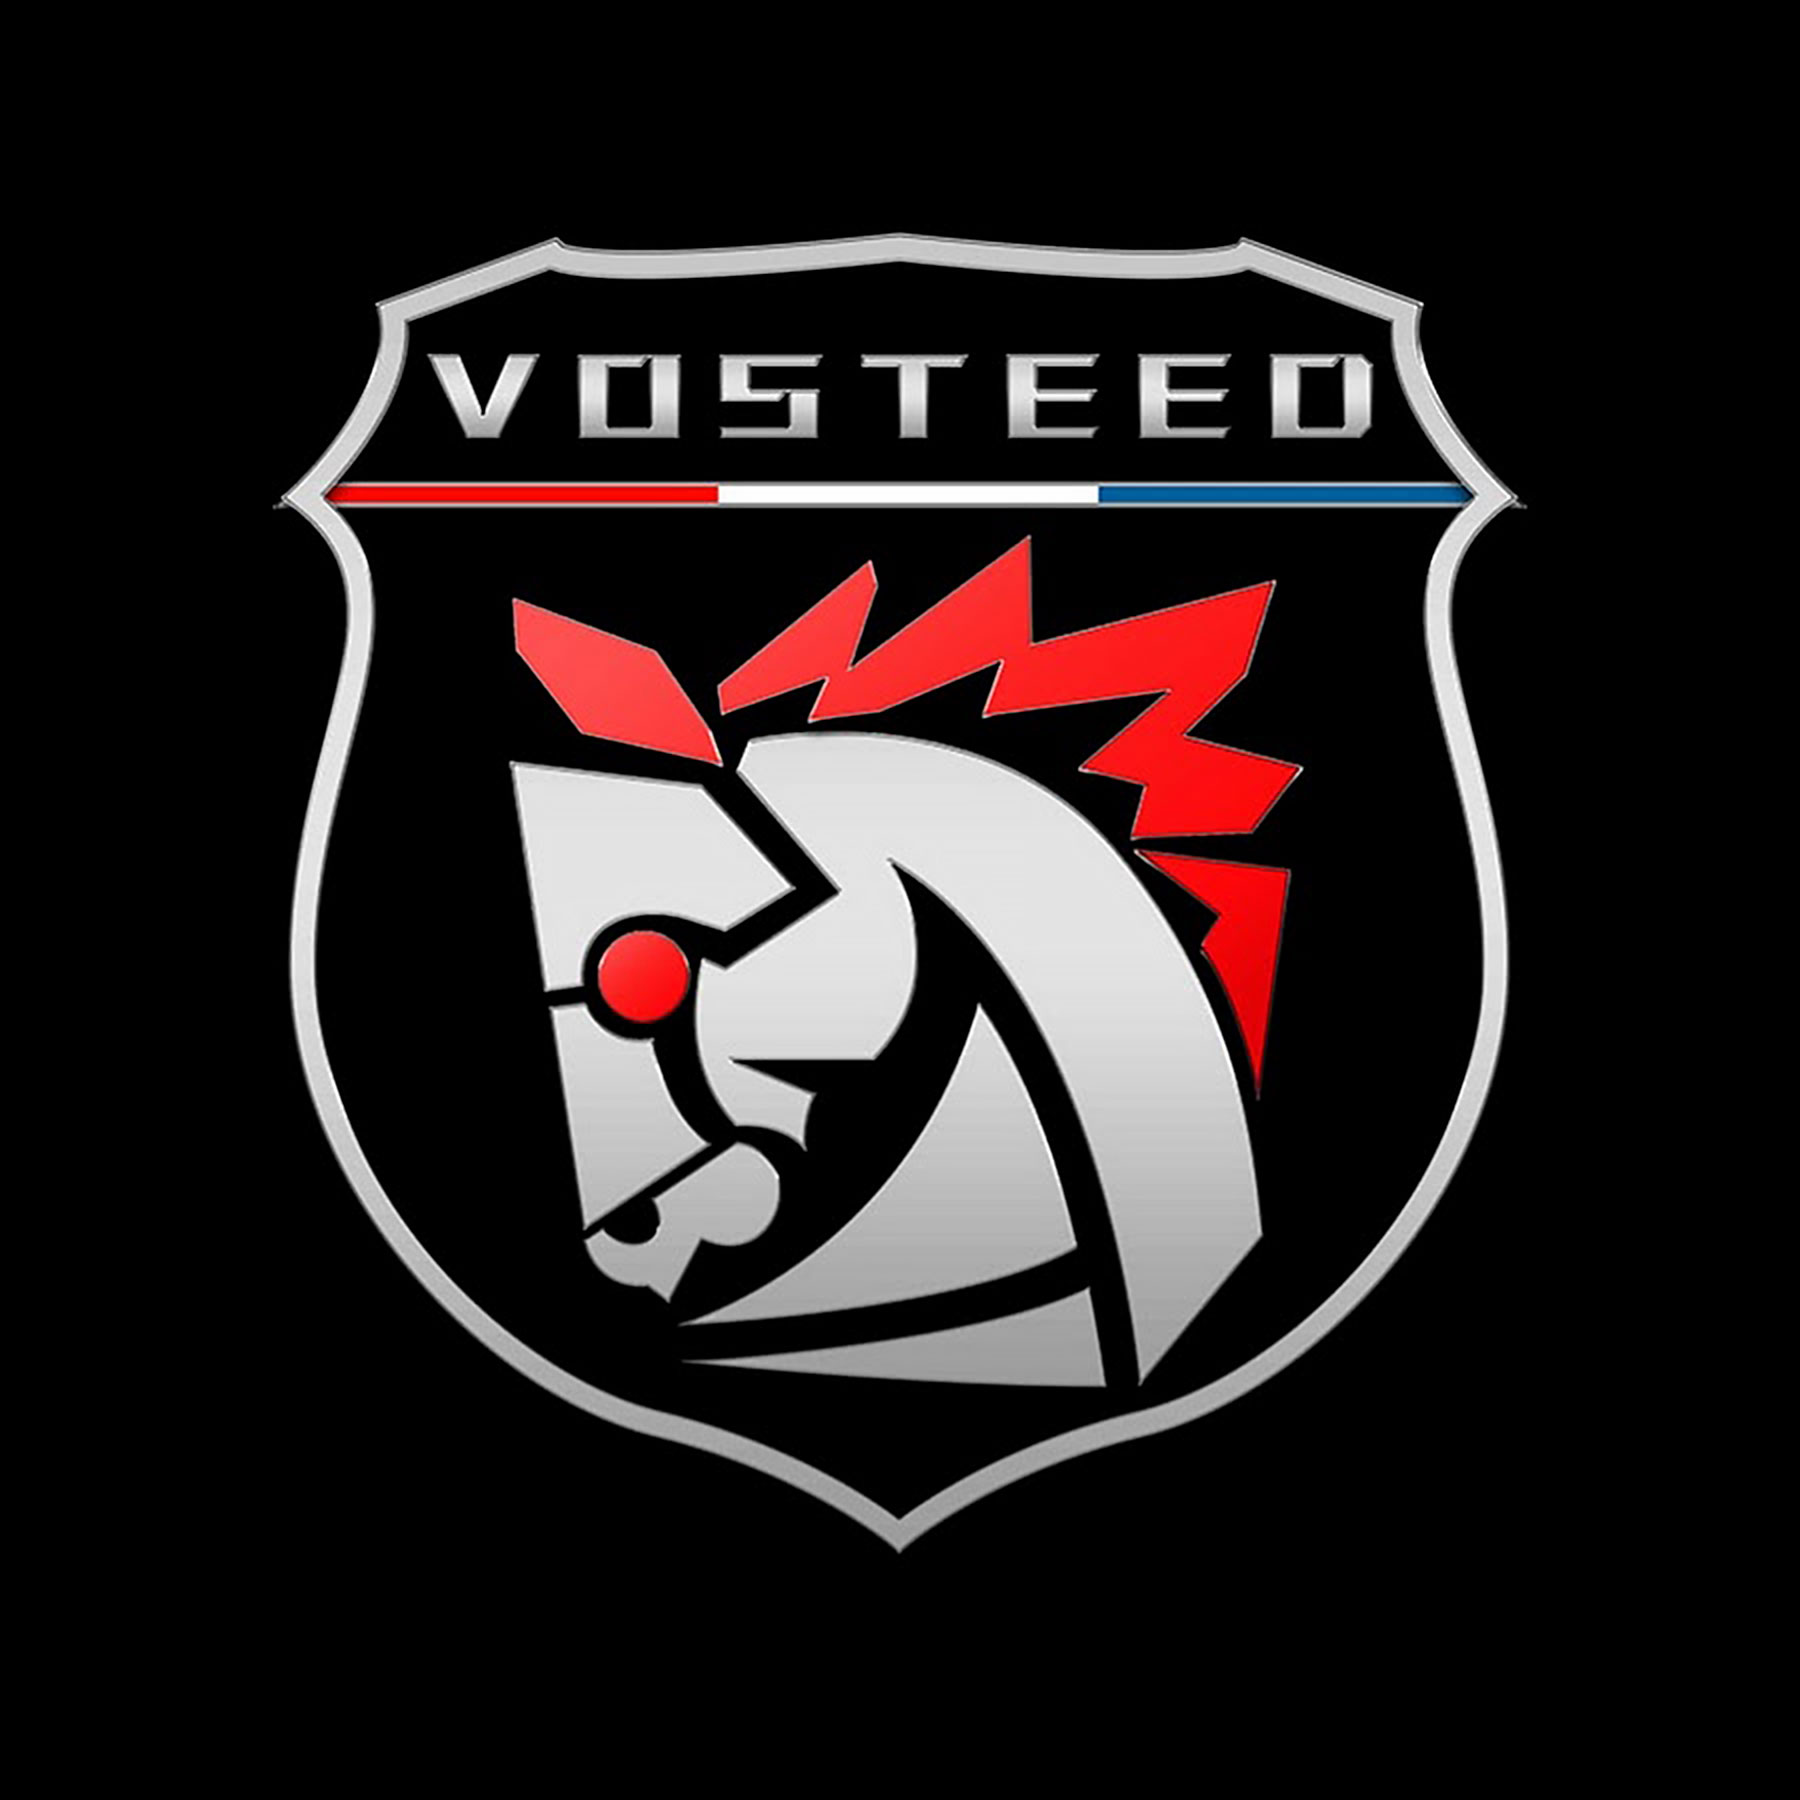 Vosteed logo for the section of the article about the company. 